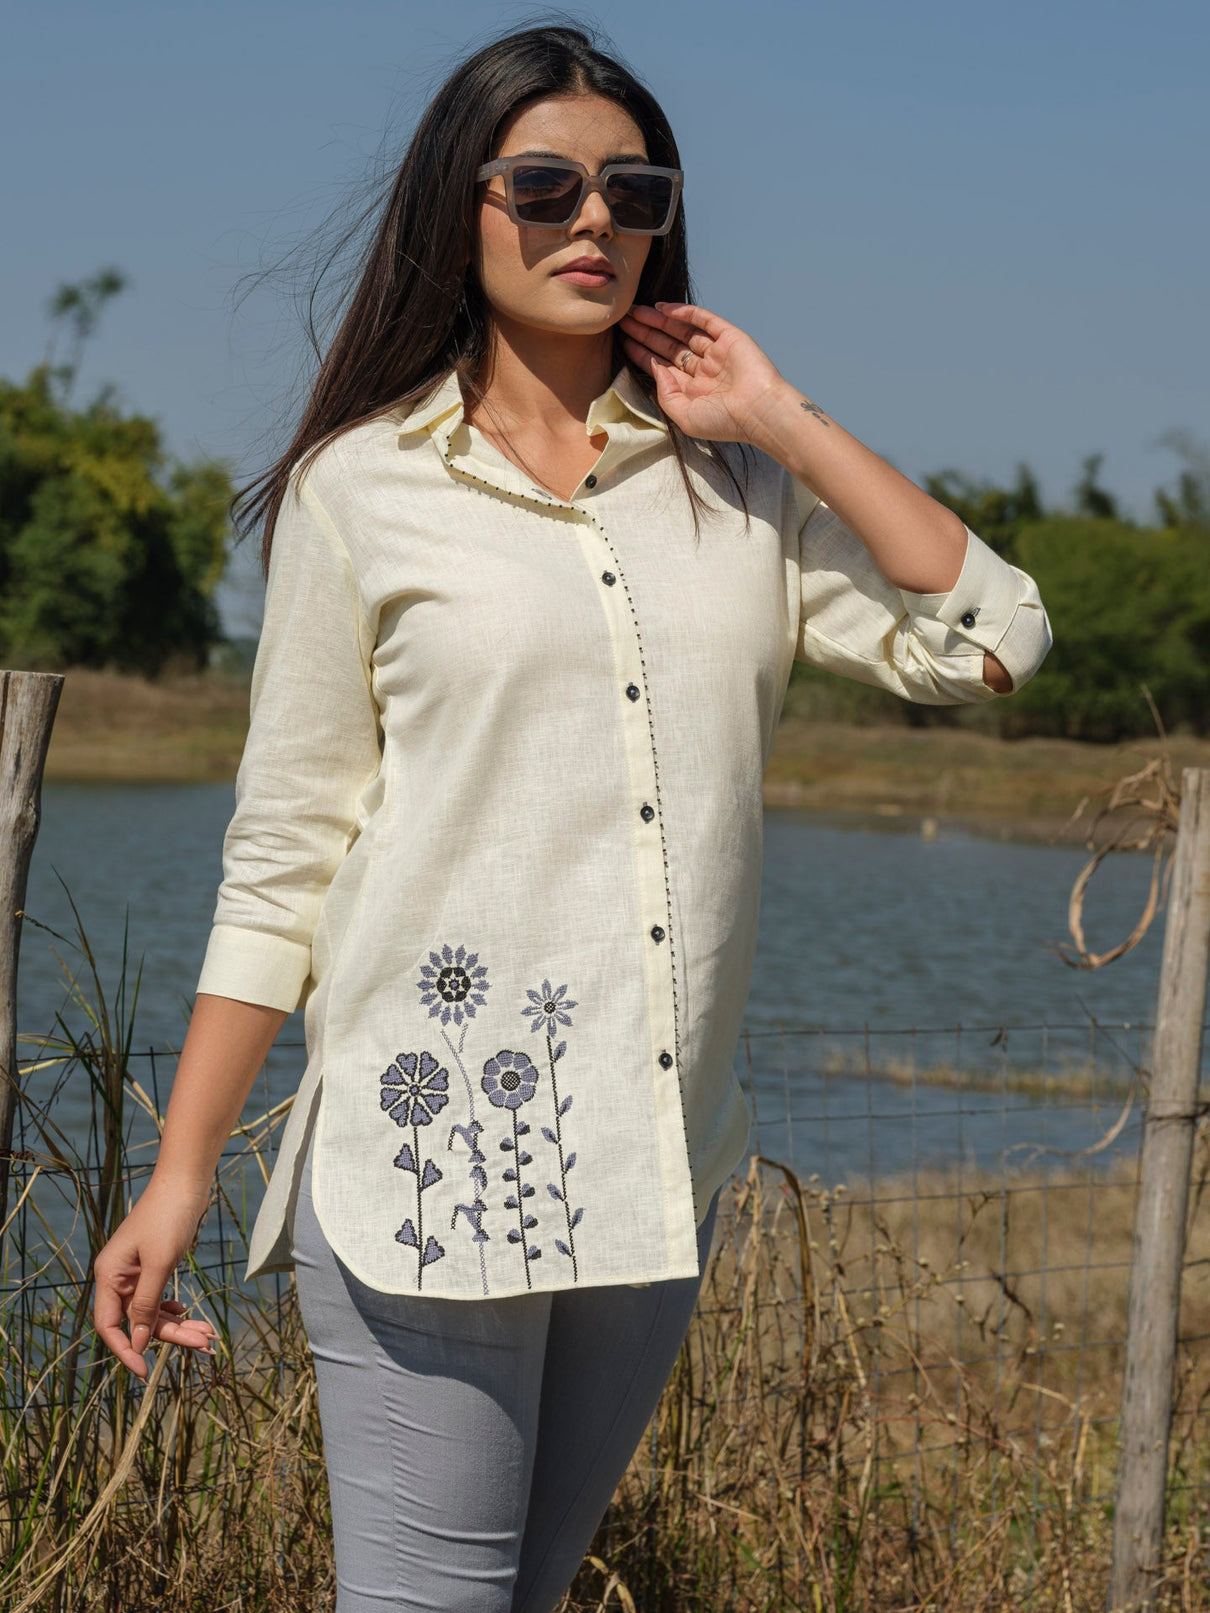 Plain Top with Cross Stitch Embroidery at Bead Work Details